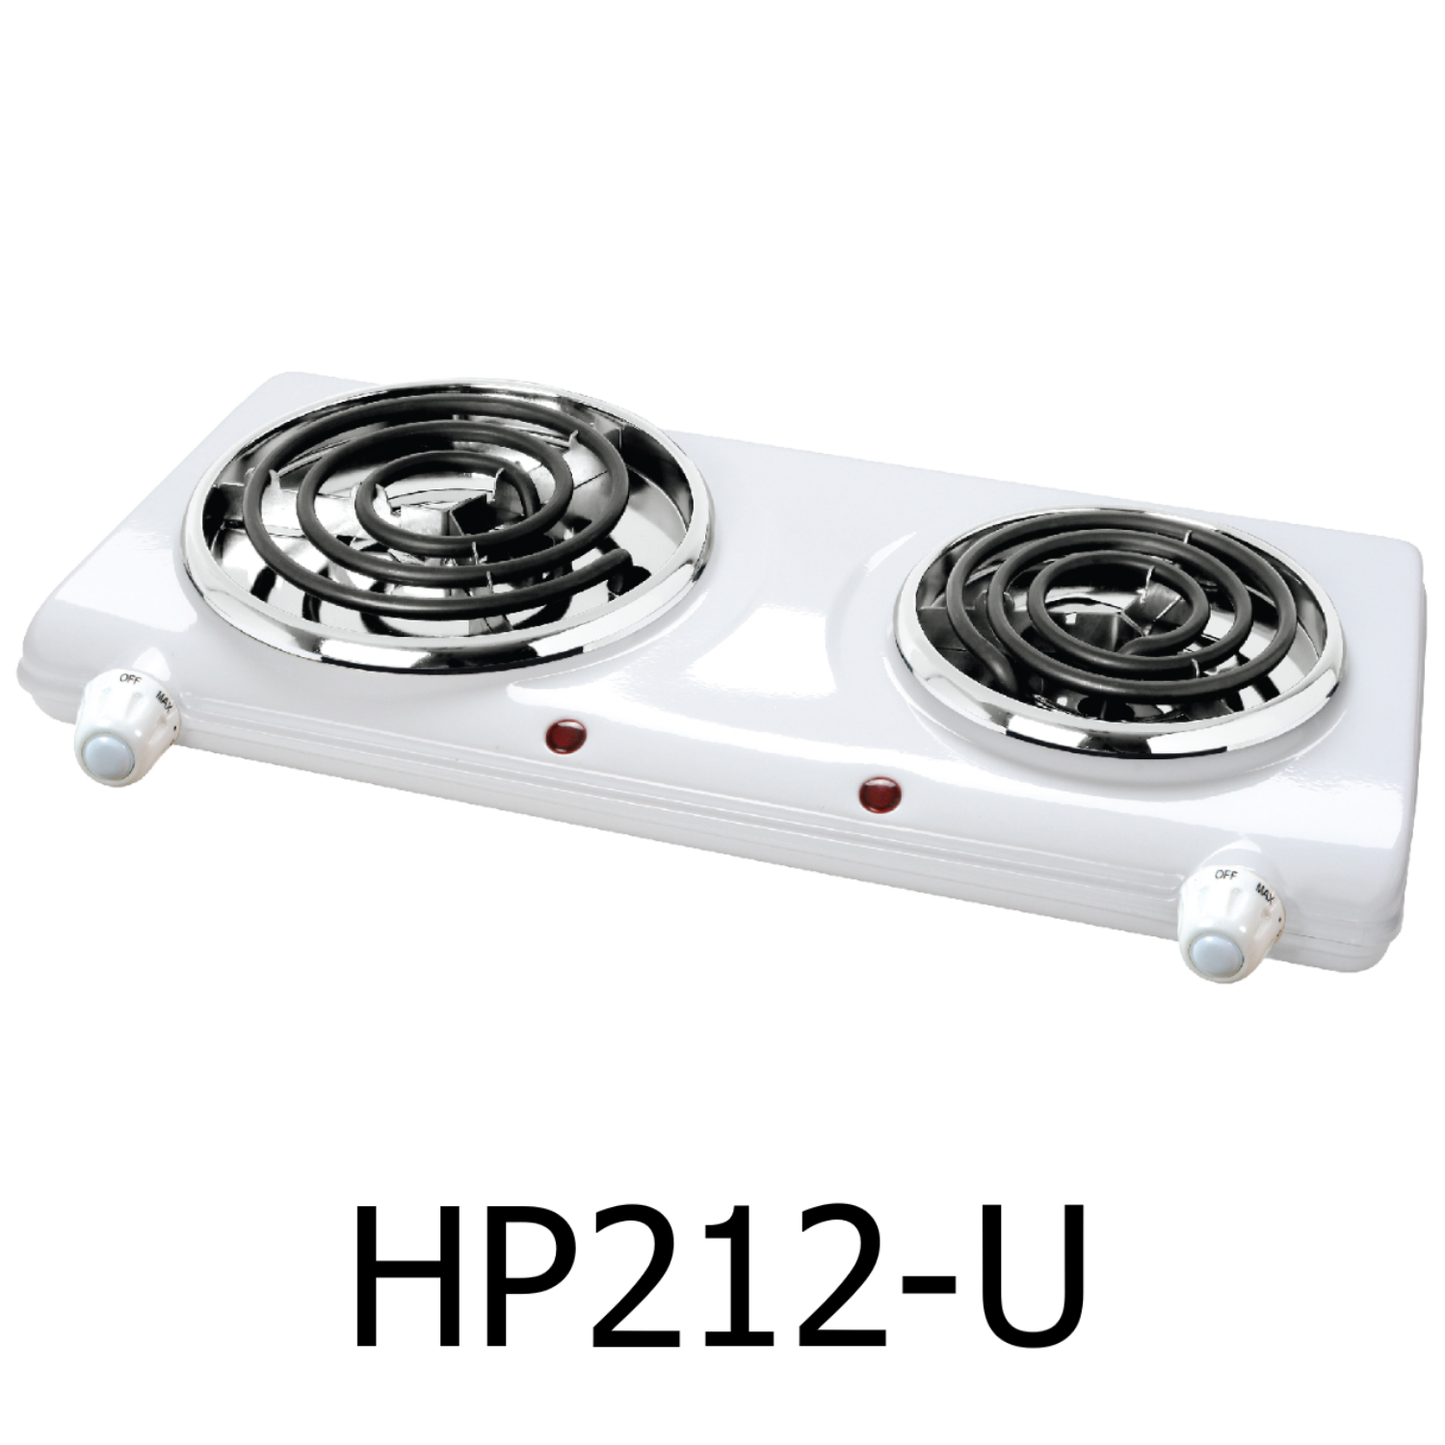 1500 Watts Double Electric Hot Plate Countertop / Cast Iron Burner